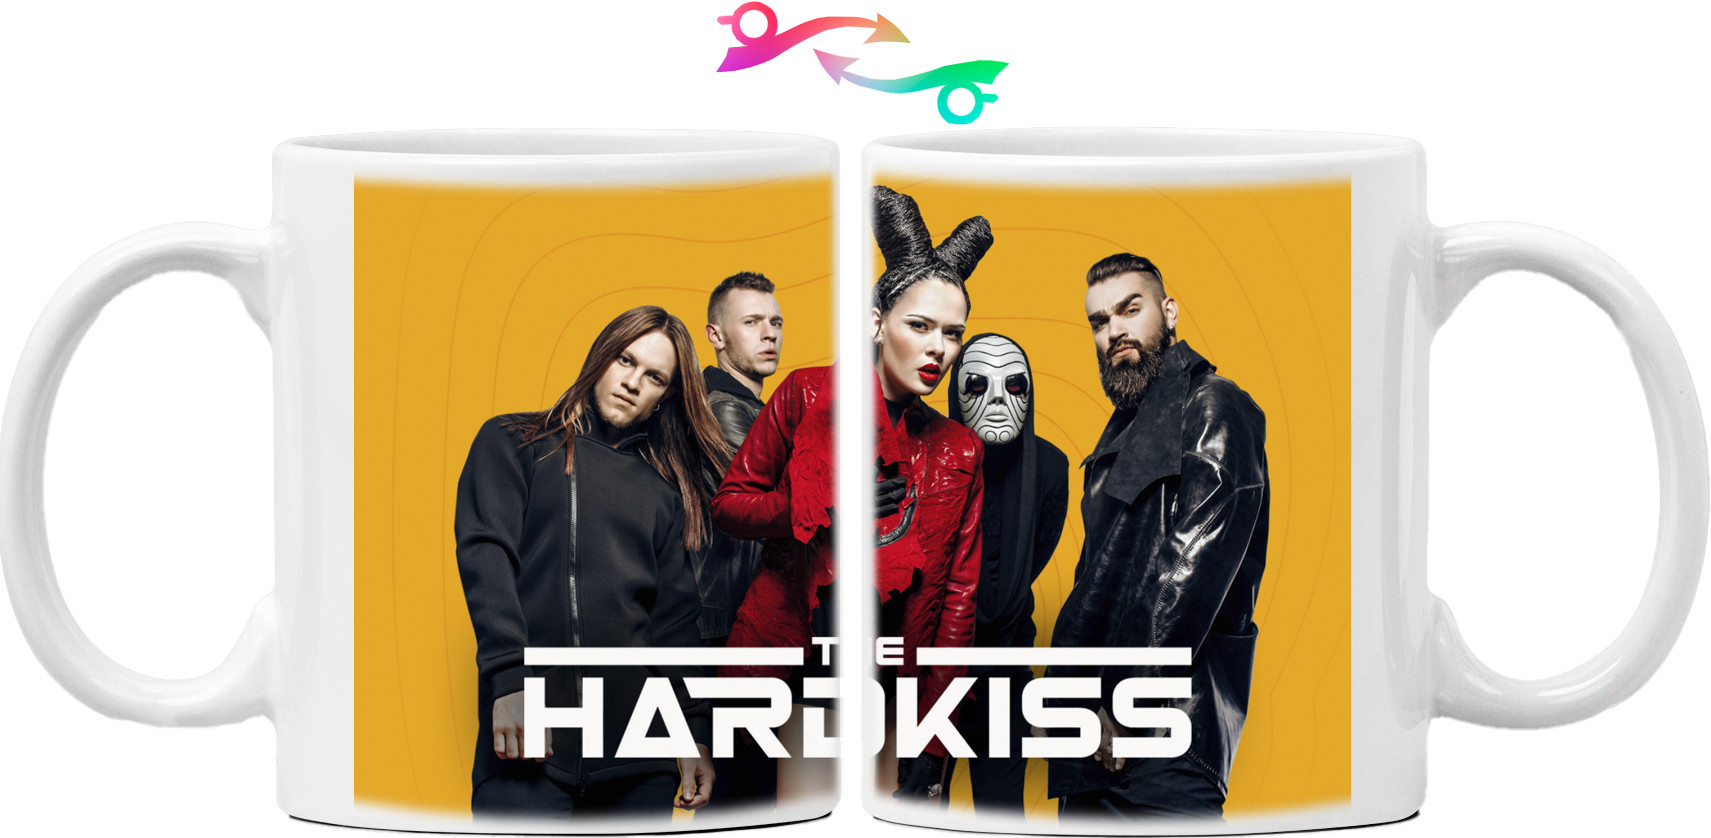 THE HARDKISS 5